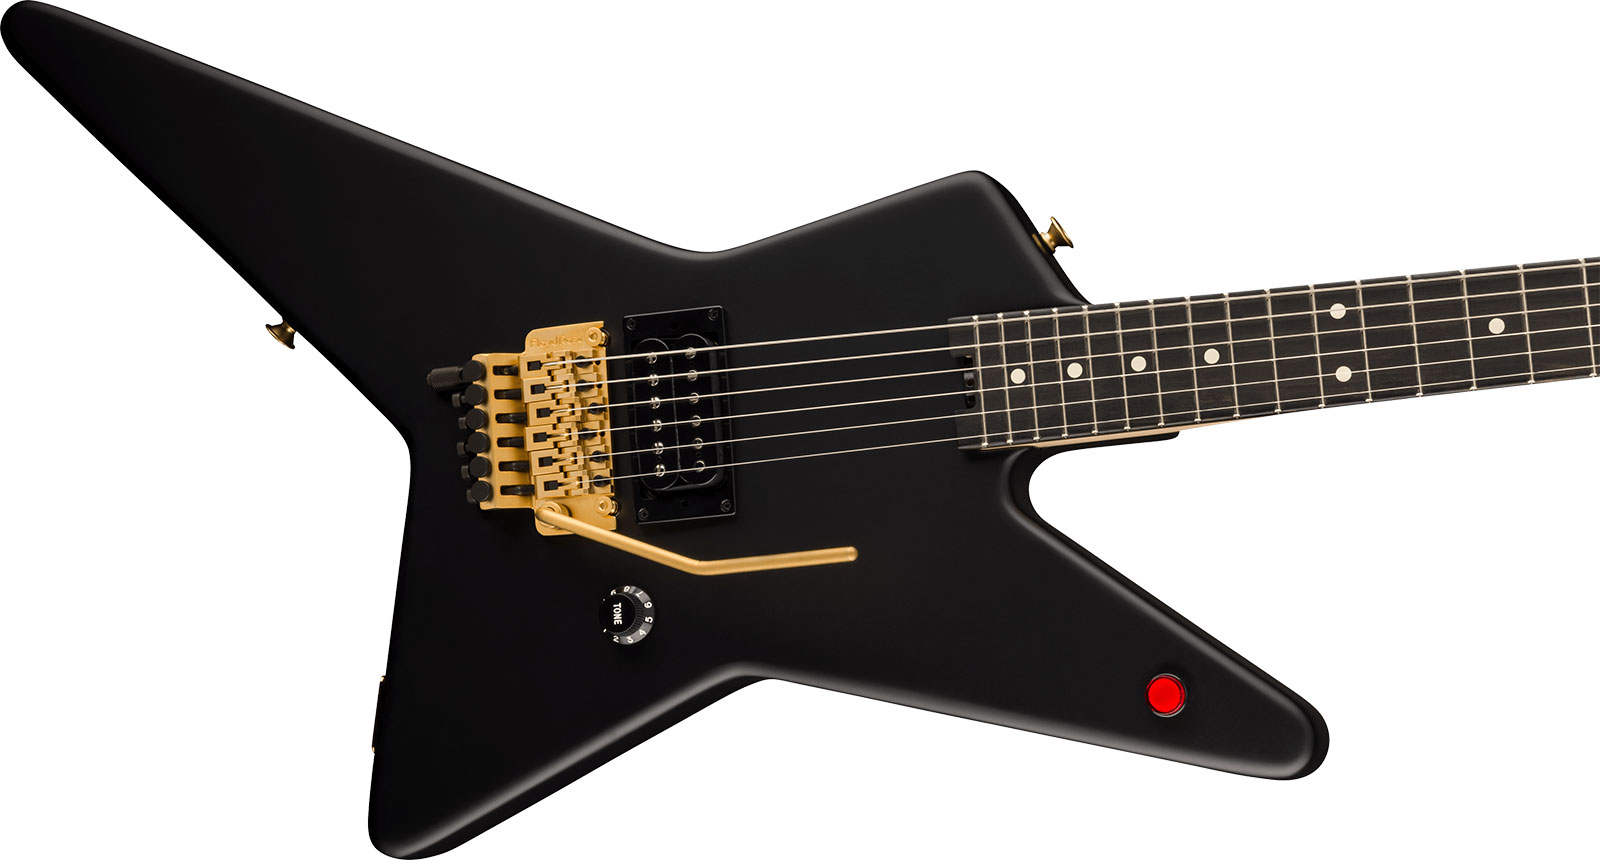 Evh Star Limited Edition 1h Fr Eb - Stealth Black With Gold Hardware - Guitarra electrica metalica - Variation 2